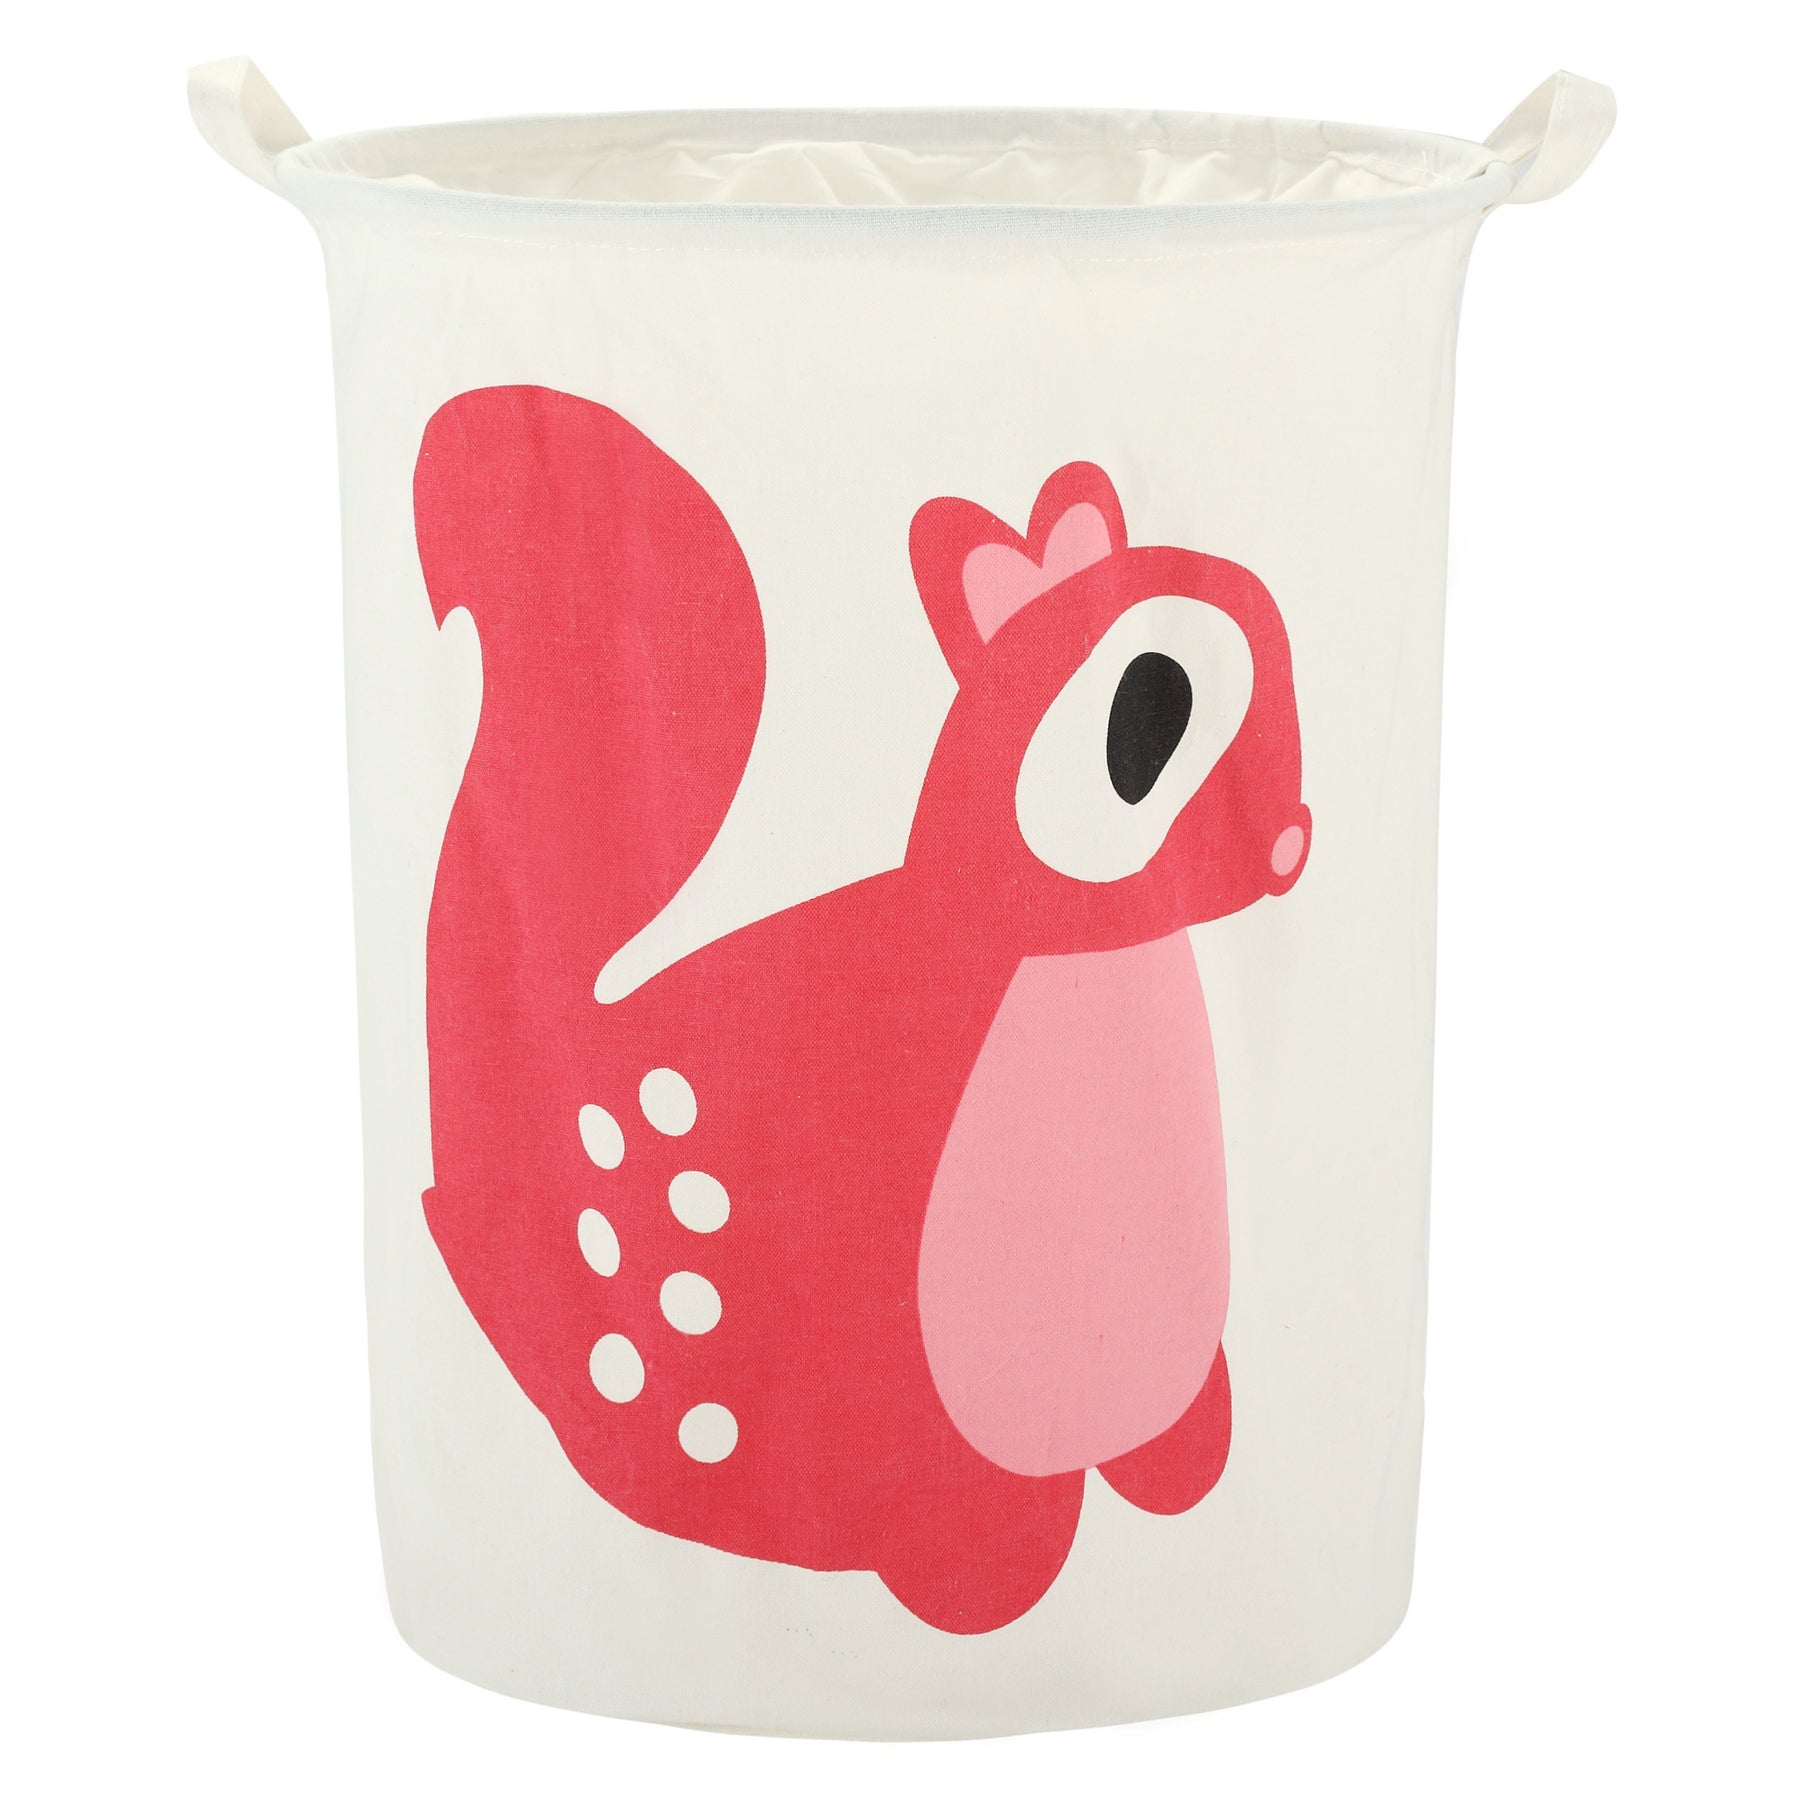 Printed Esquilo Baby Laundry Basket